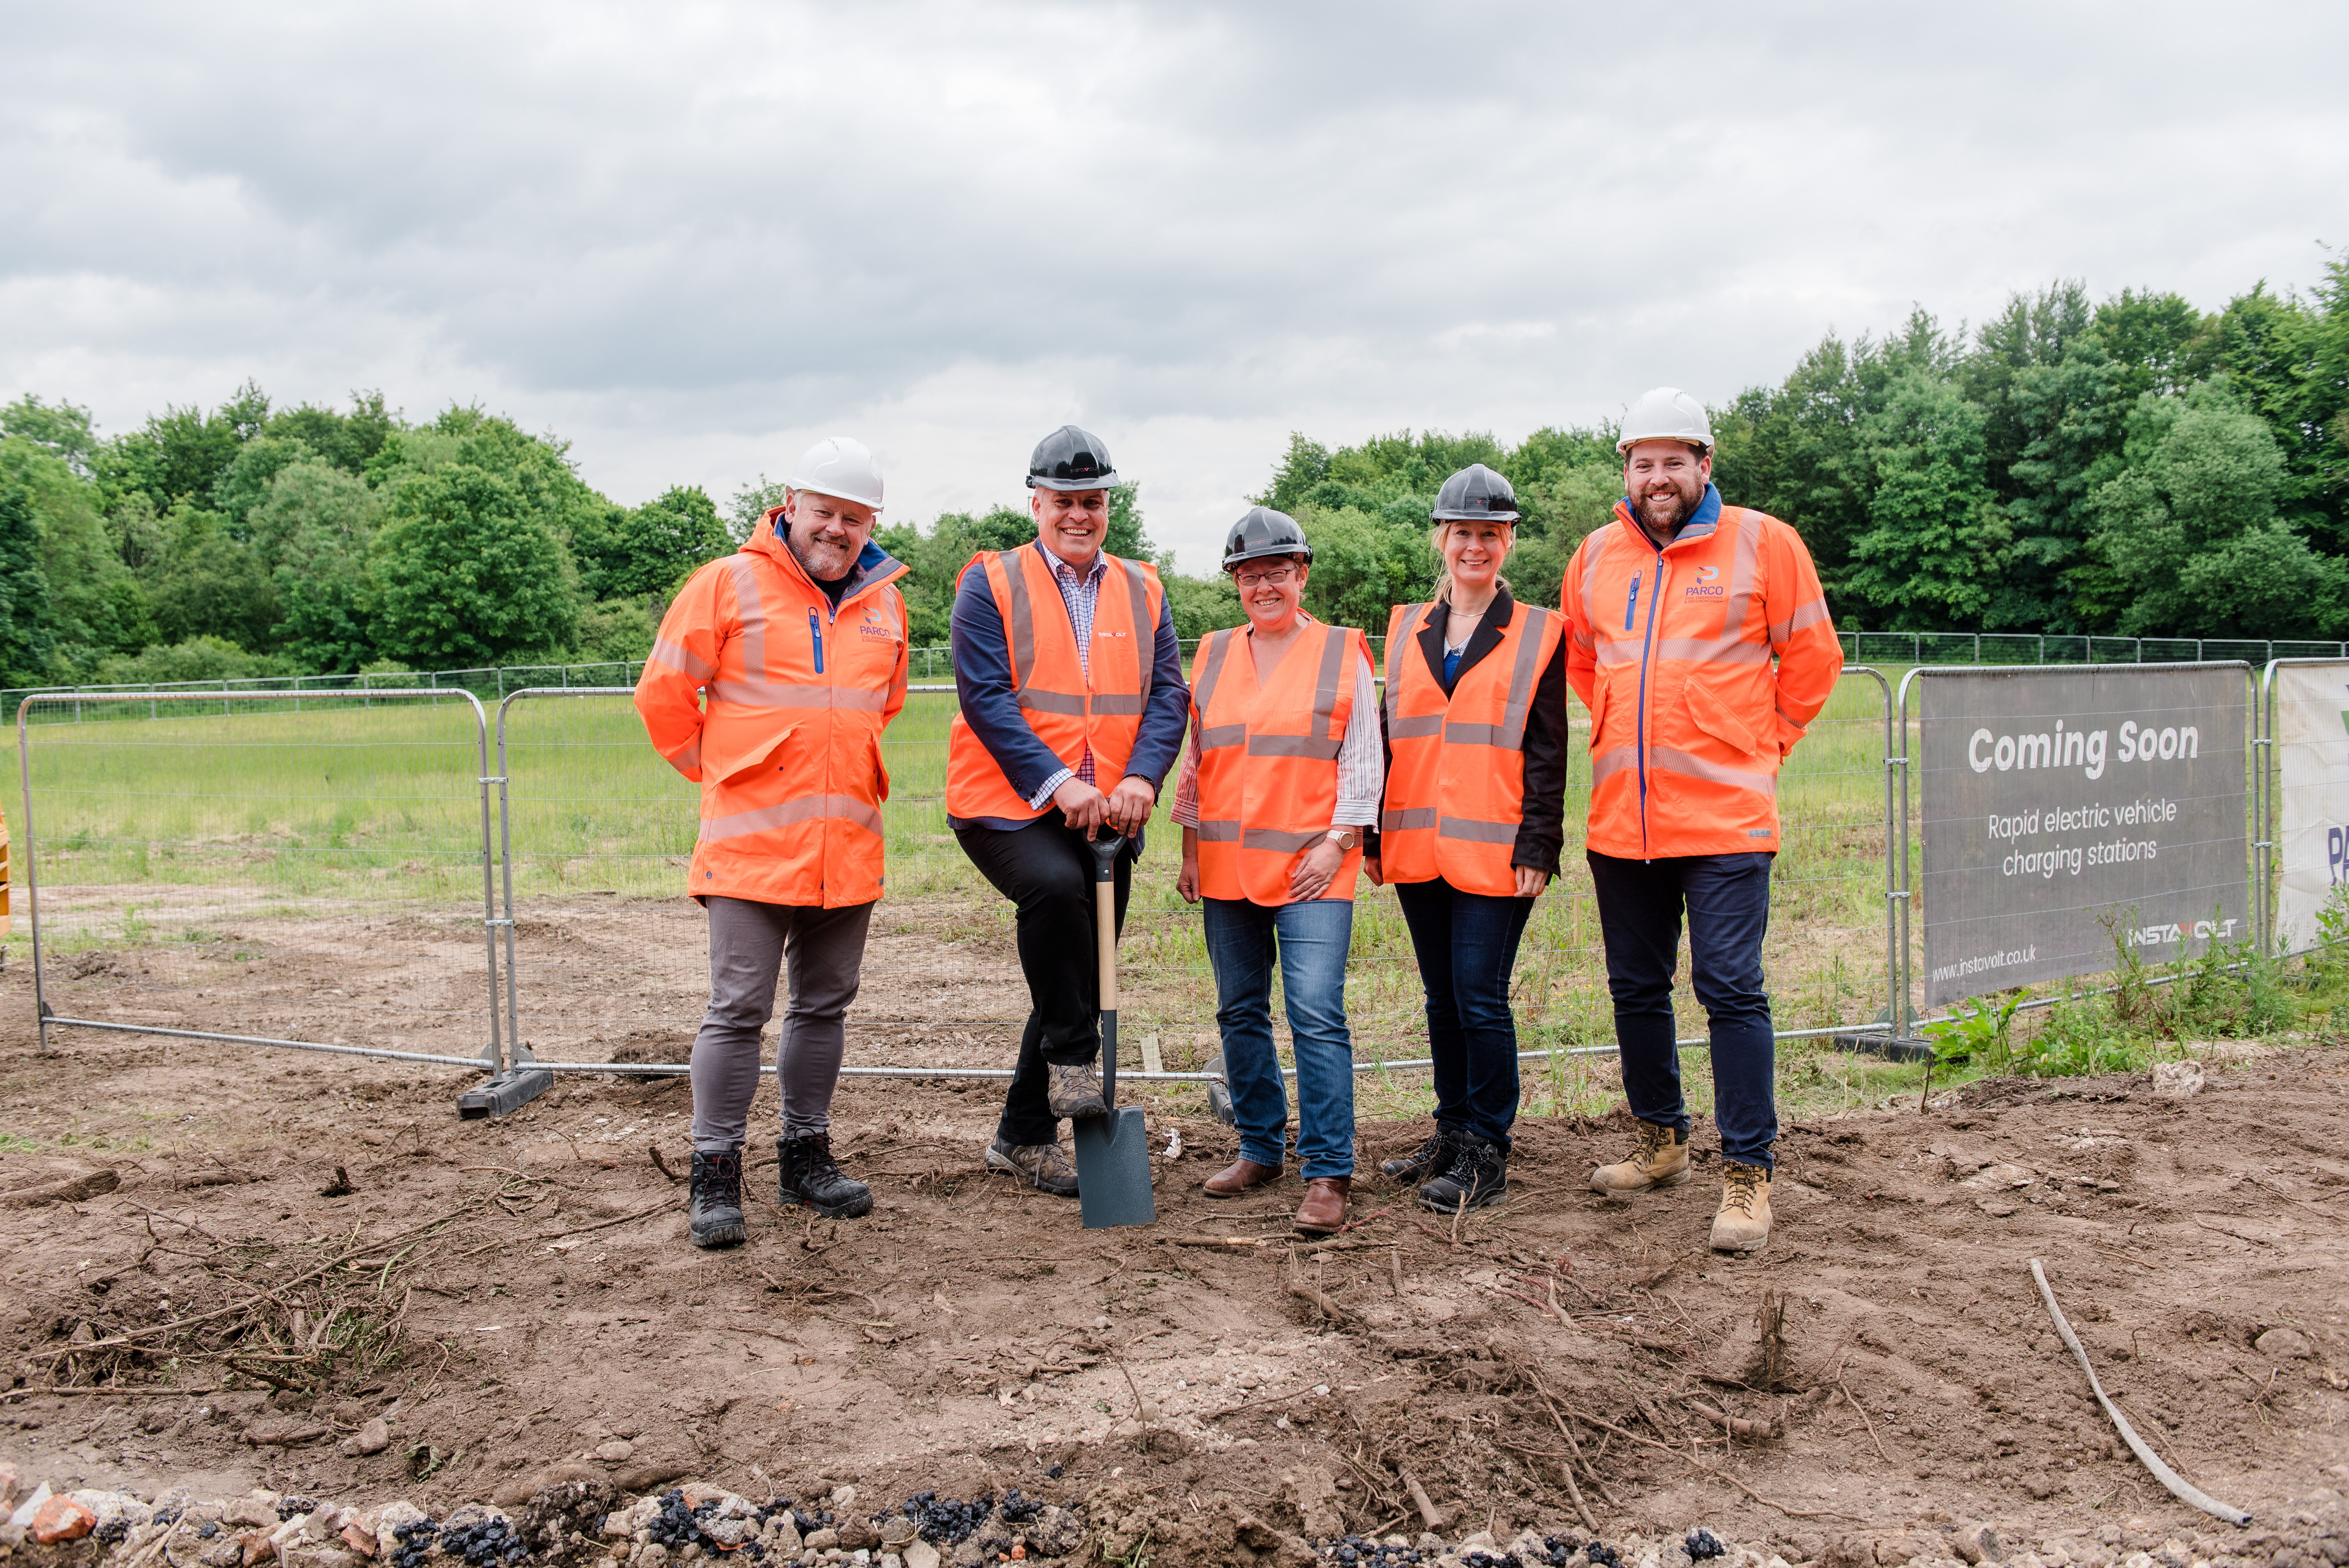 (Left to right)  Michael Hand, Managing Director of Parco civil engineering and groundworks limited    Delvin Lane, CEO of InstaVolt  Cllr Kelsie Learney, Cabinet Member for Climate Emergency, Winchester City Council  Lily Coles, Hub Development Director